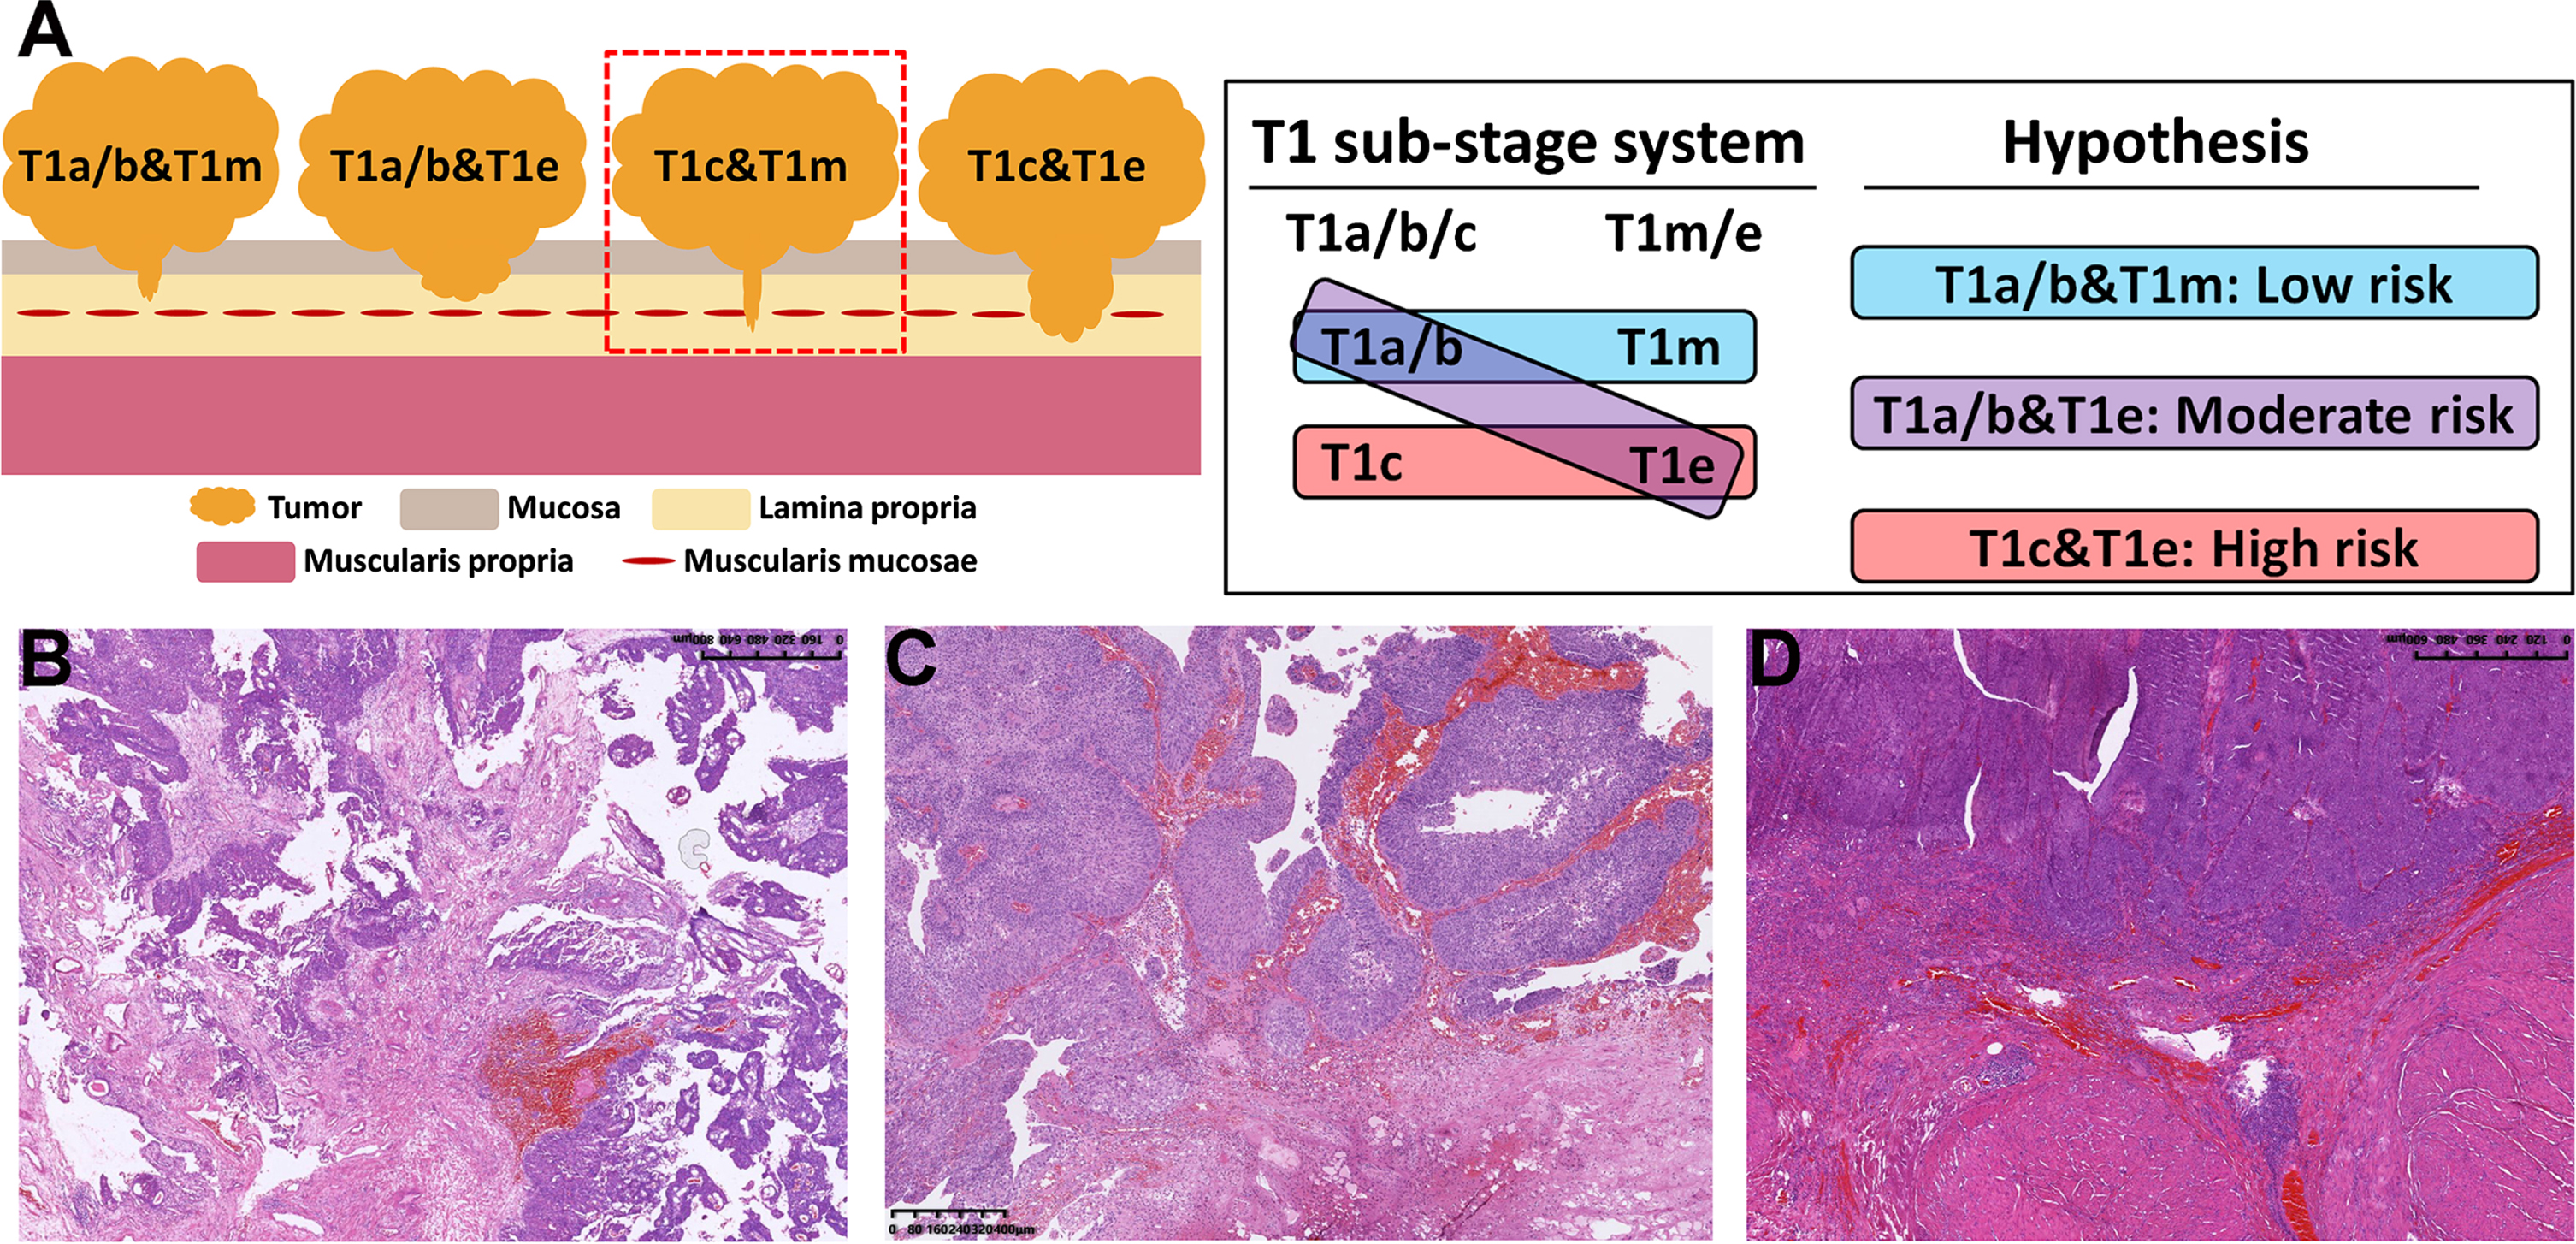 Schematic diagram (A) and the hematoxylin-eosin (HE) staining images (B D) of the combination of the T1a/b/c and T1m/e substaging systems. In our cohort, no tumor was both T1c and narrow T1m, so there were only three types of combinations, namely, T1a/b&T1m (B), T1a/b&T1e (C) and T1c&T1e (D), and we assumed that T1a/b&T1m had the best prognosis and T1c&T1e had the poorest prognosis.